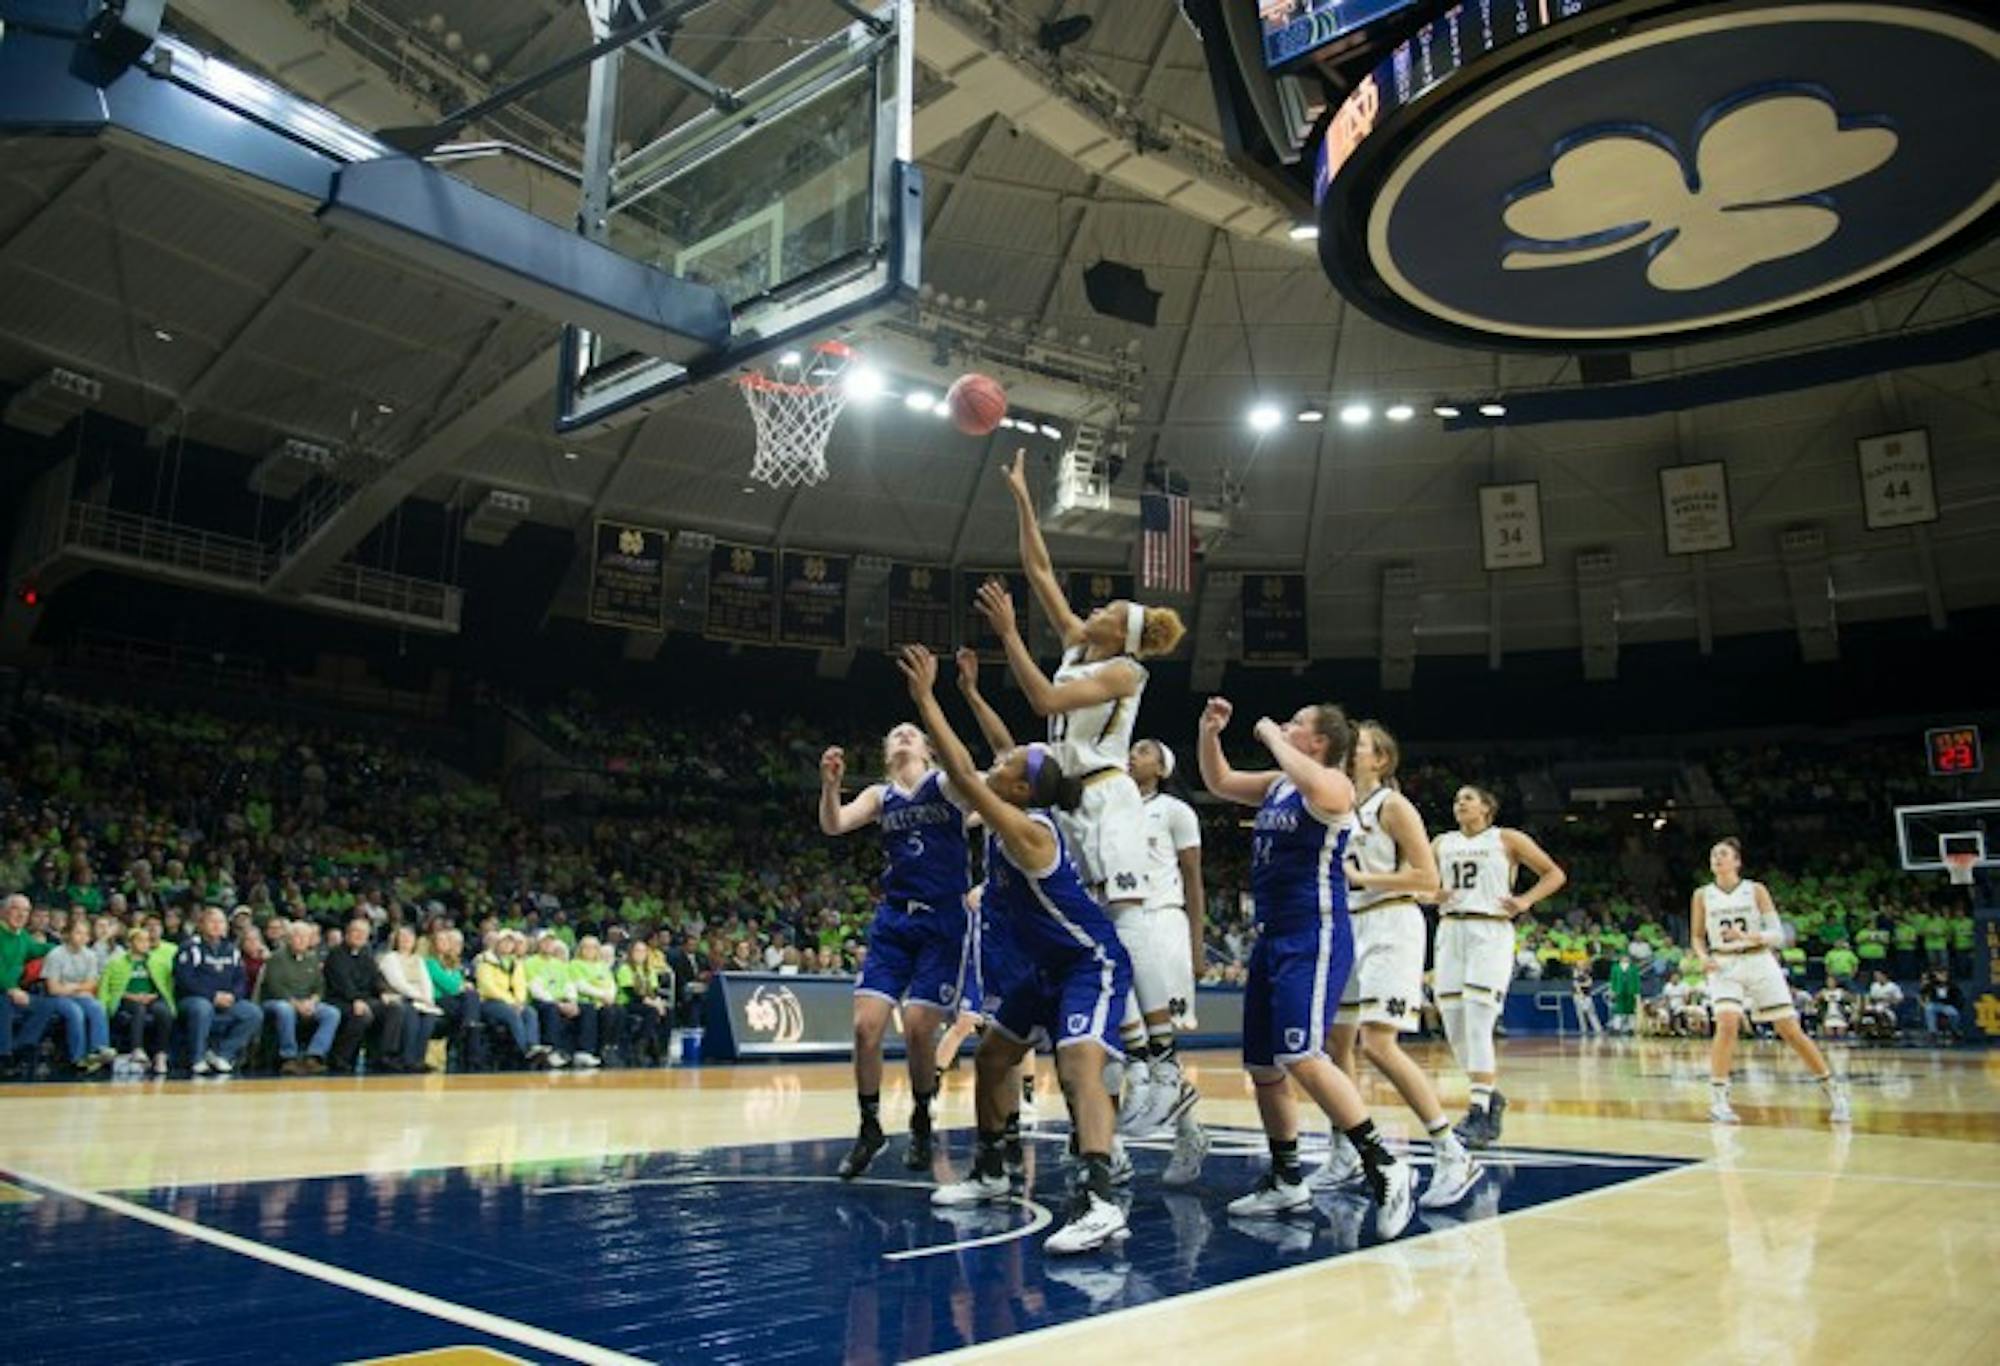 Notre Dame freshman forward Brianna Turner jumps for a rebound during a 104-29 rout of Holy Cross on Nov. 23. Turner has won several awards this season, including five ACC Freshman of the Week honors.